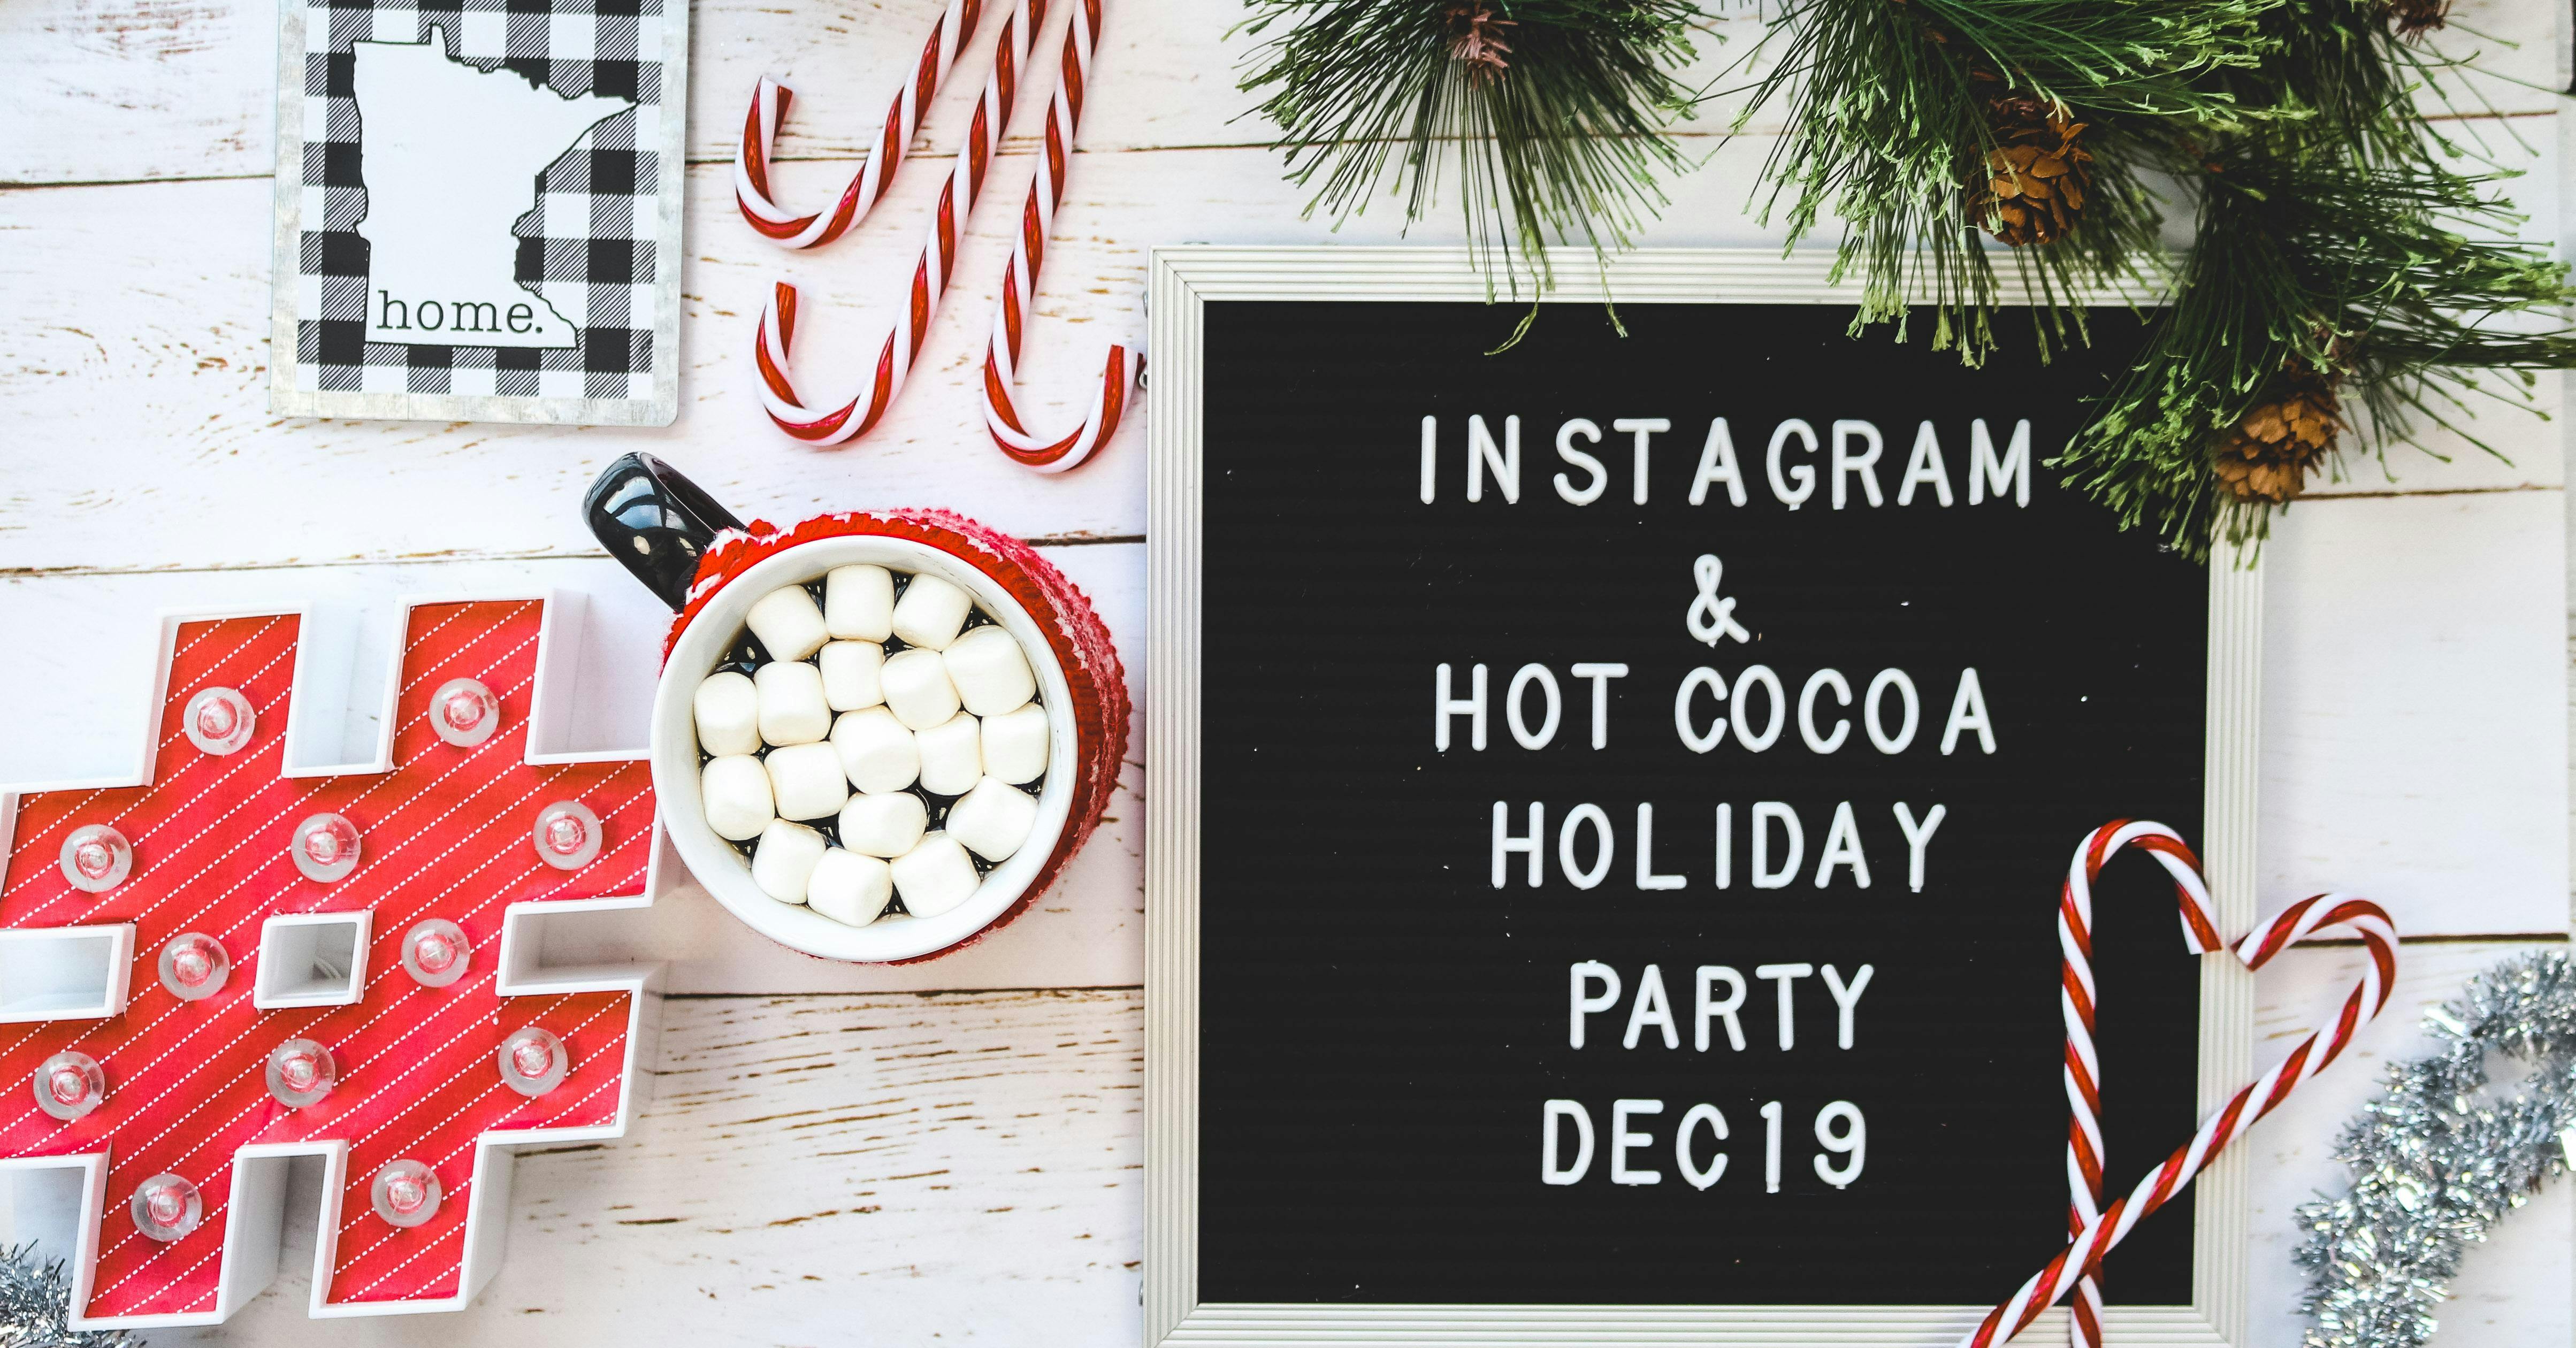 Instagram & Hot Cocoa Holiday Party from Twin Cities Collective